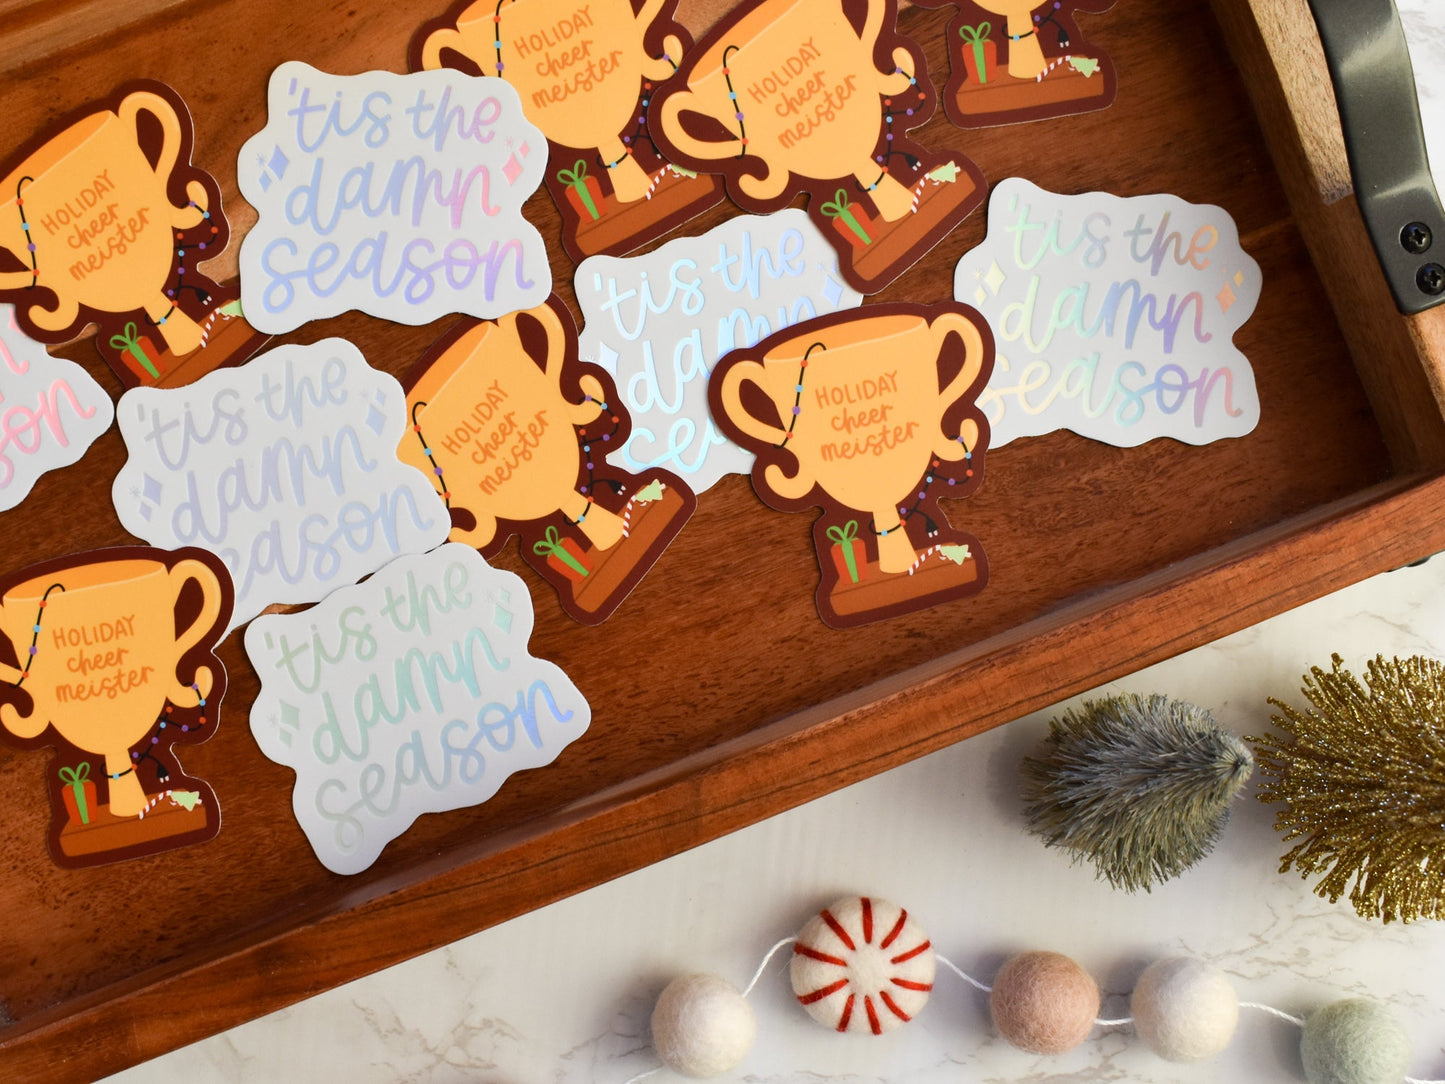 Load image into Gallery viewer, Holiday Cheermeister Sticker
